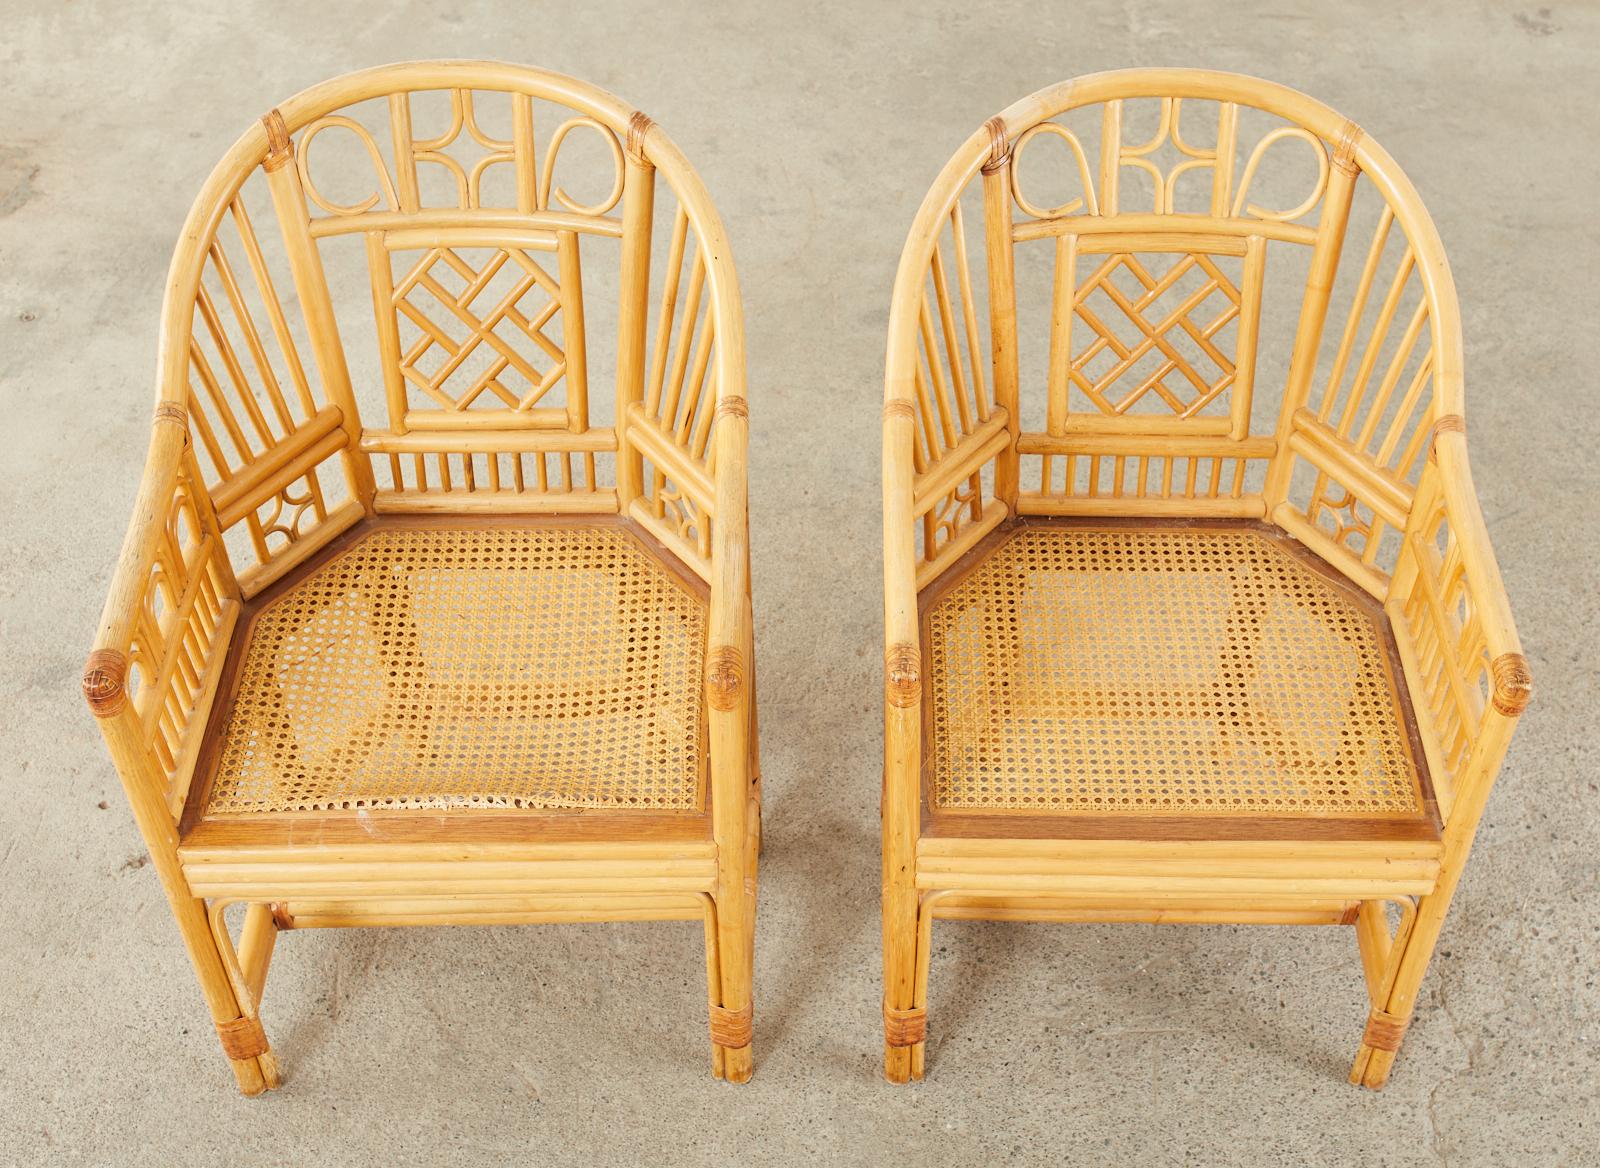 British Colonial Pair of Bamboo Rattan Brighton Pavilion Style Armchairs